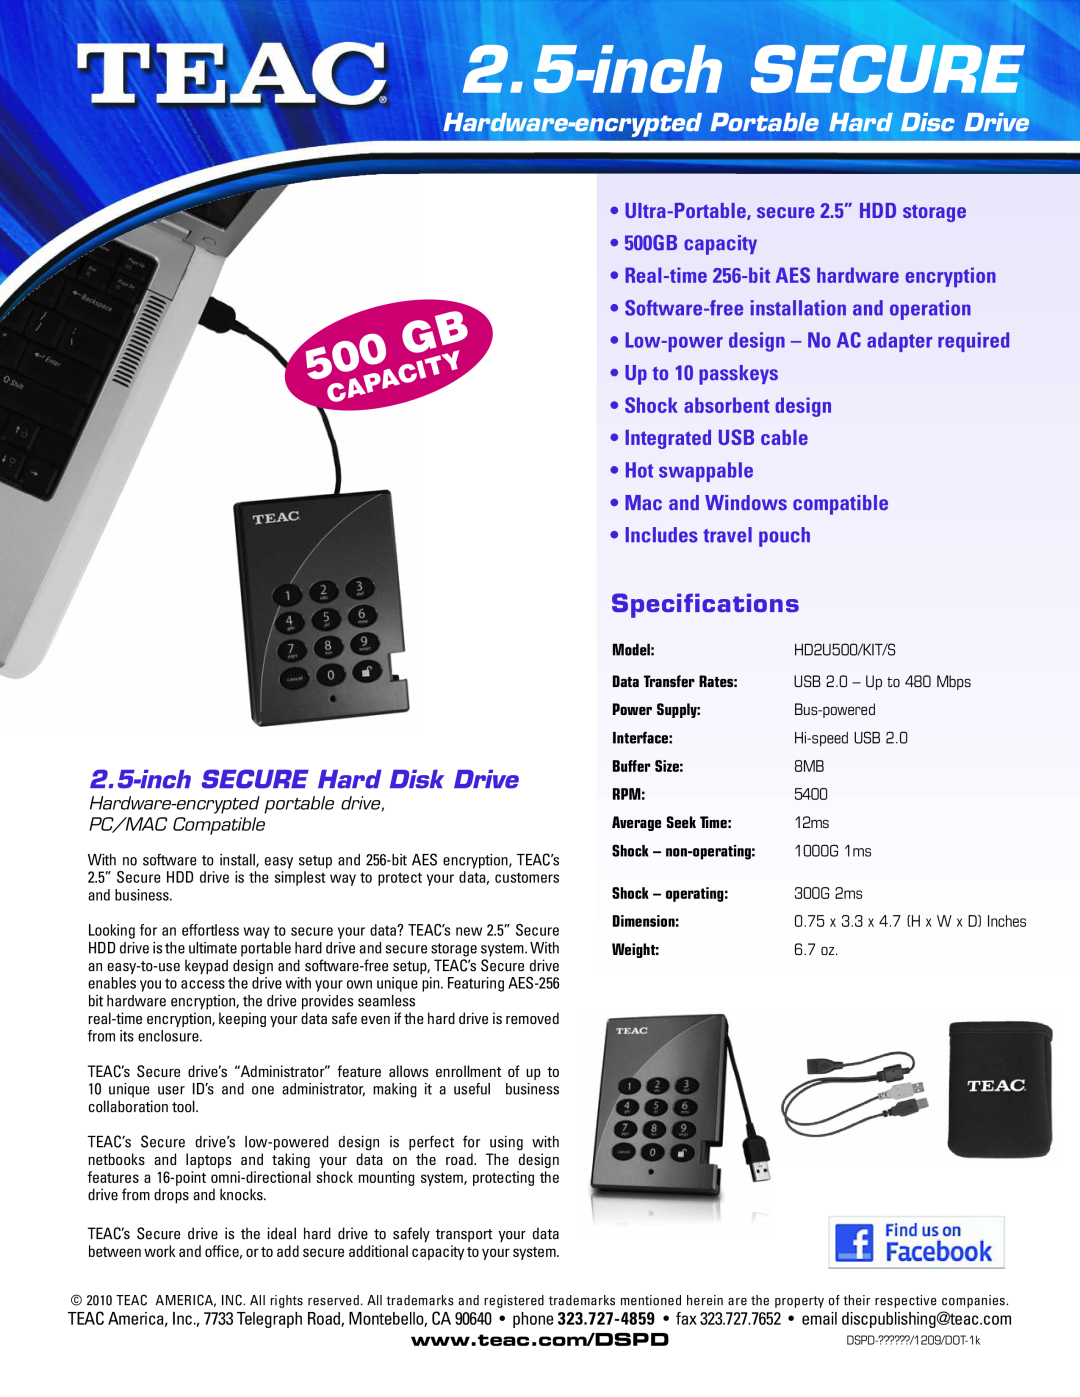 Teac HD2U500/KIT/S specifications Hardware-encrypted Portable Hard Disc Drive, inch SECURE Hard Disk Drive, Capacity 